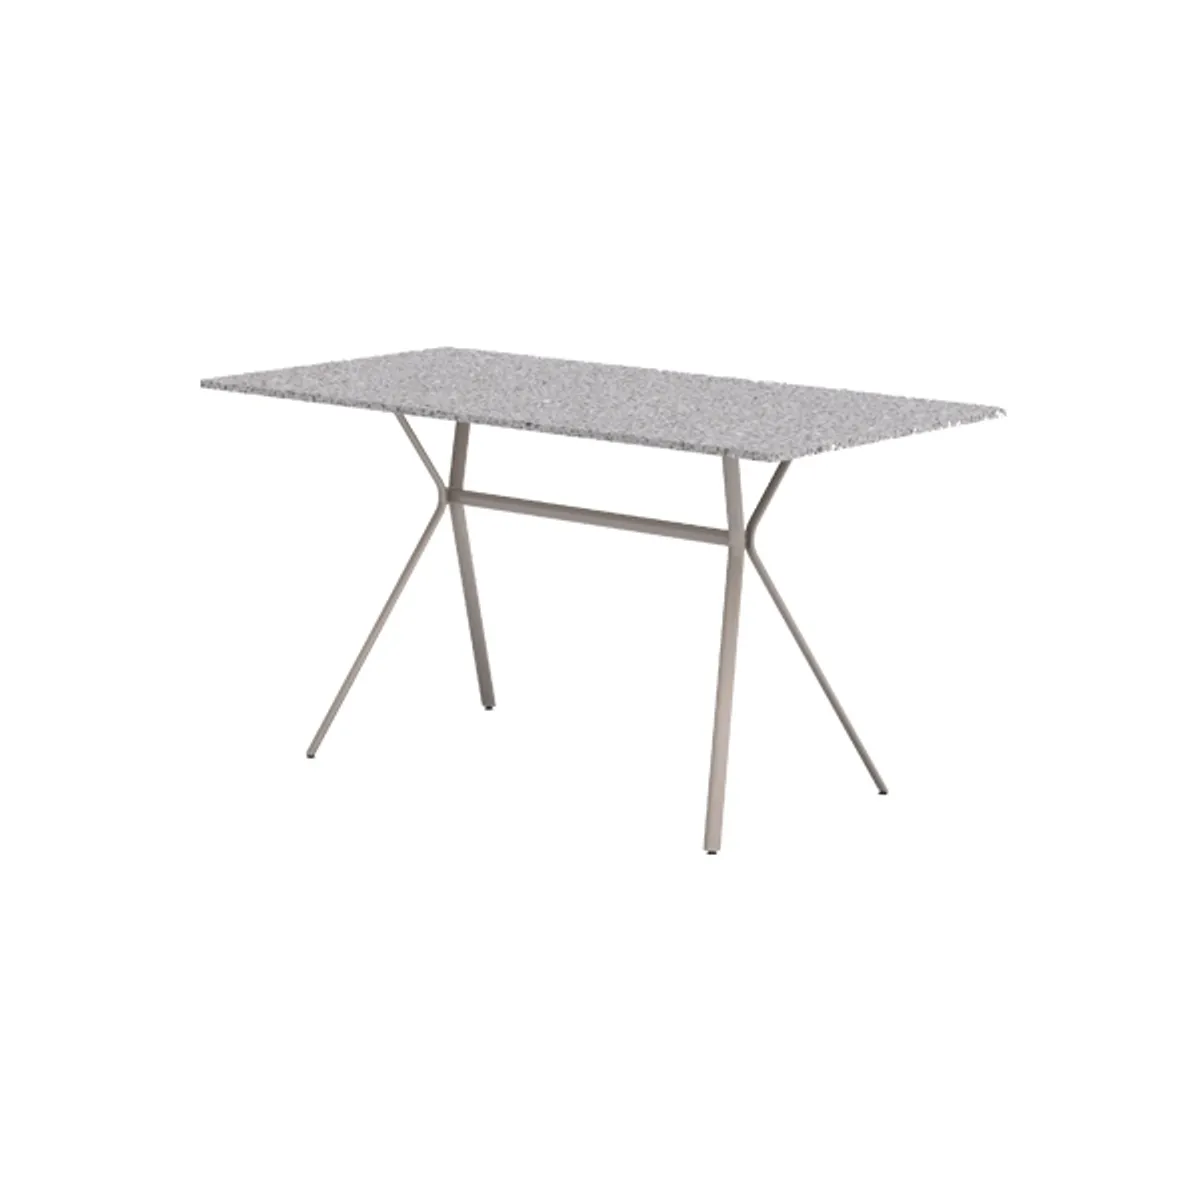 Carola rectangle table Inside Out Contracts